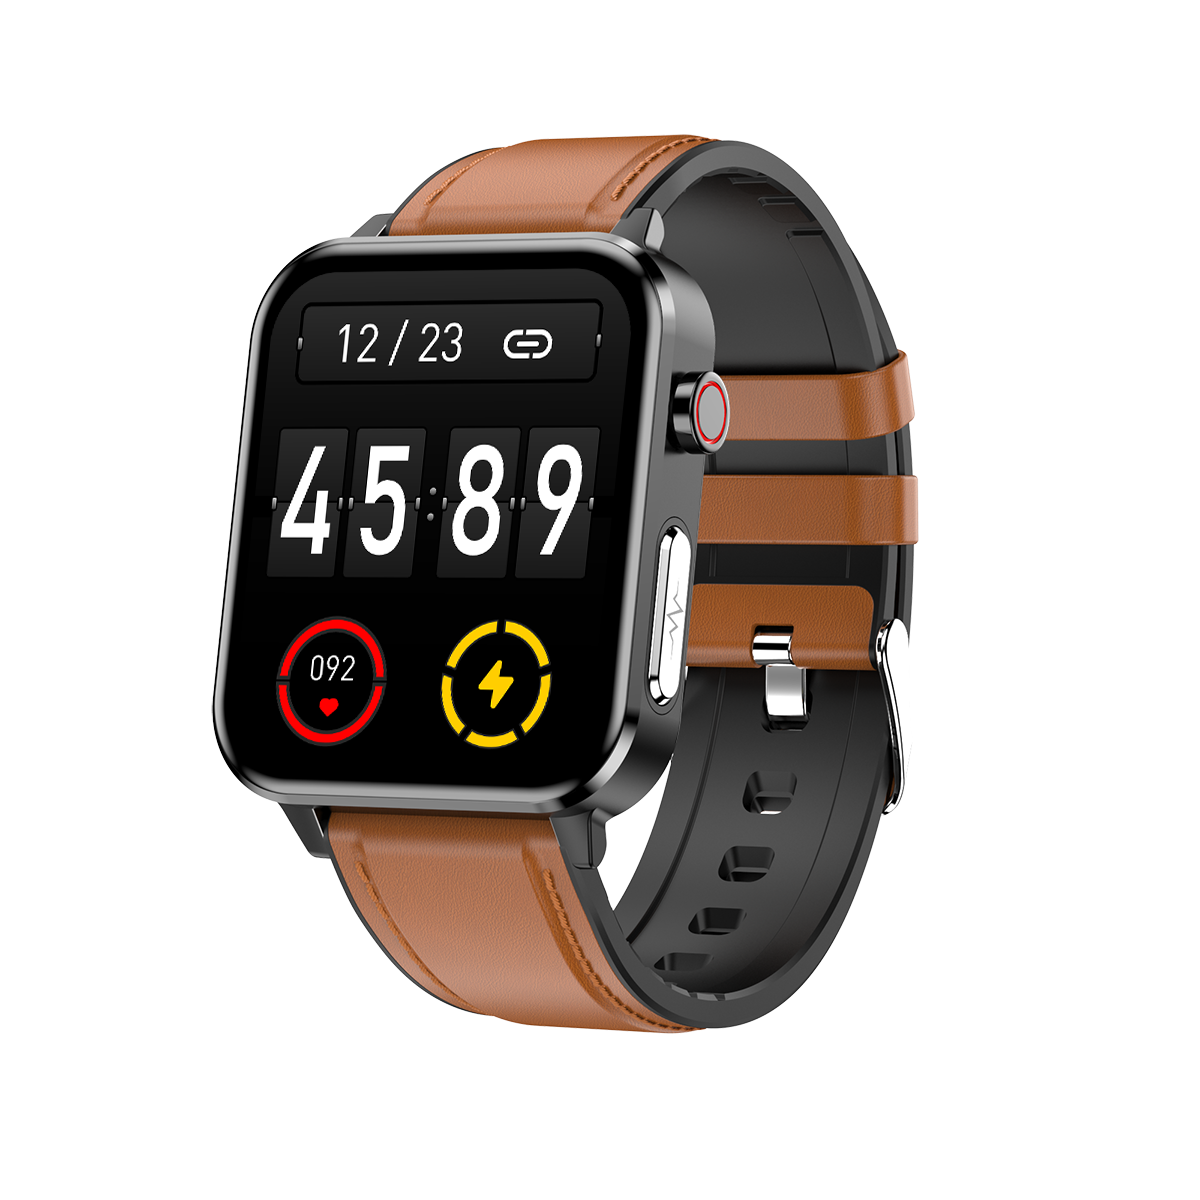 Fitness Digital Smart Watch Phone with Touch Display ECG Monitor